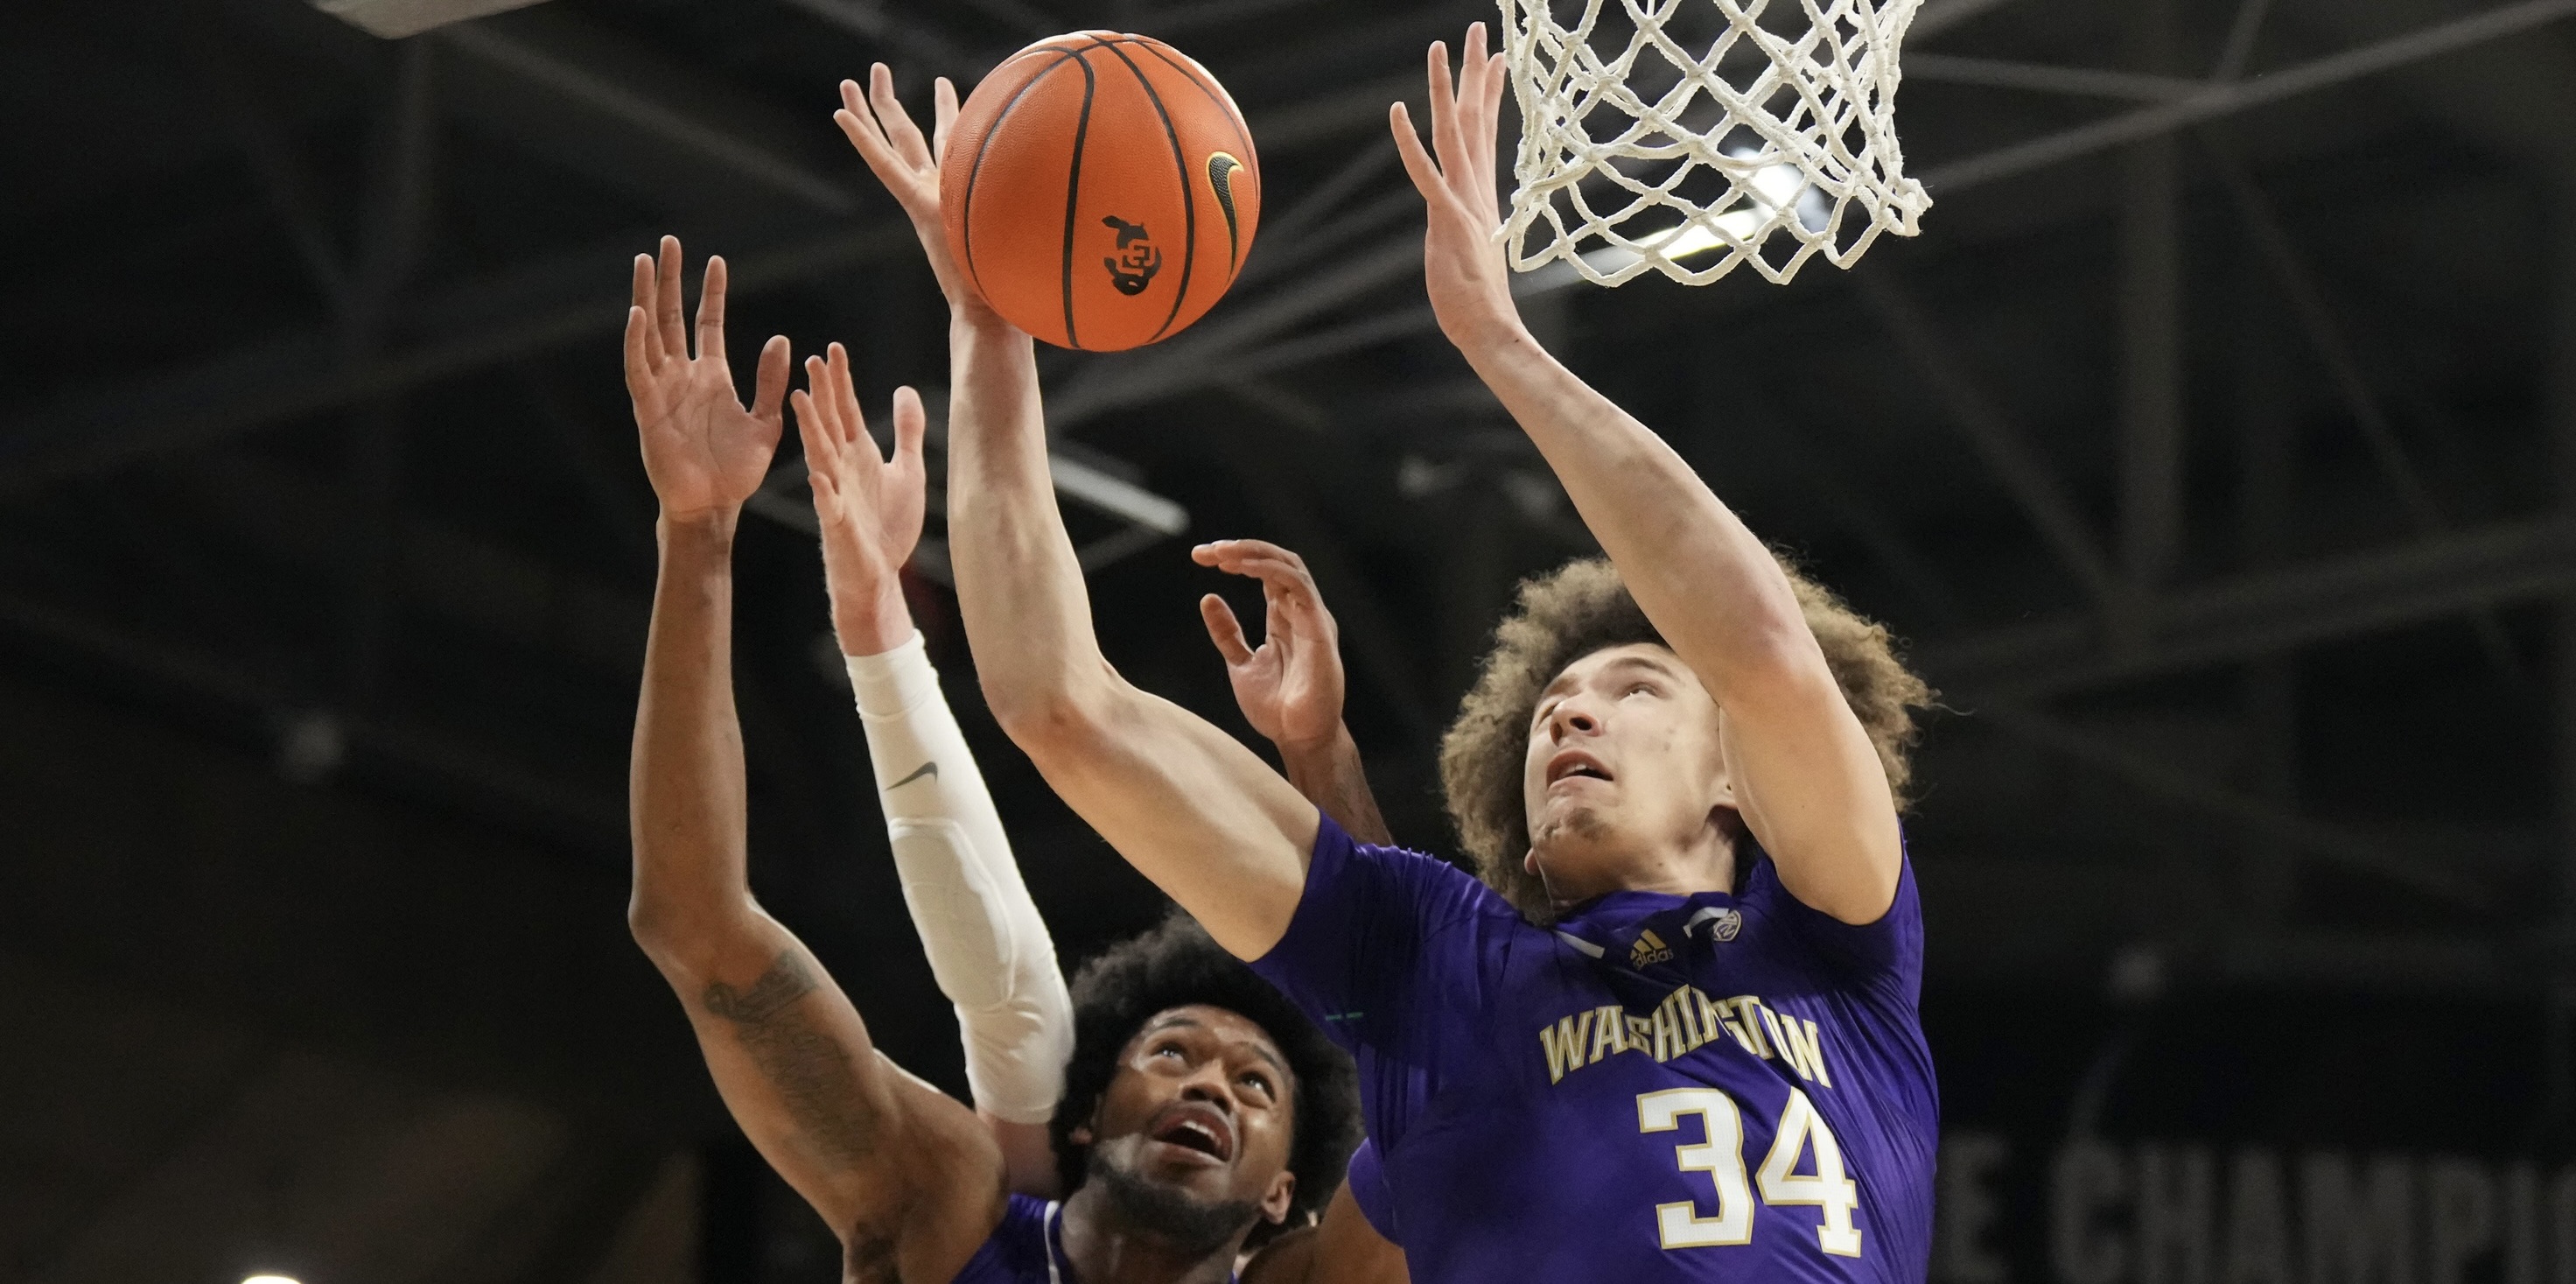 Huskies Hold Off Colorado on Road for 3rd Consecutive Win